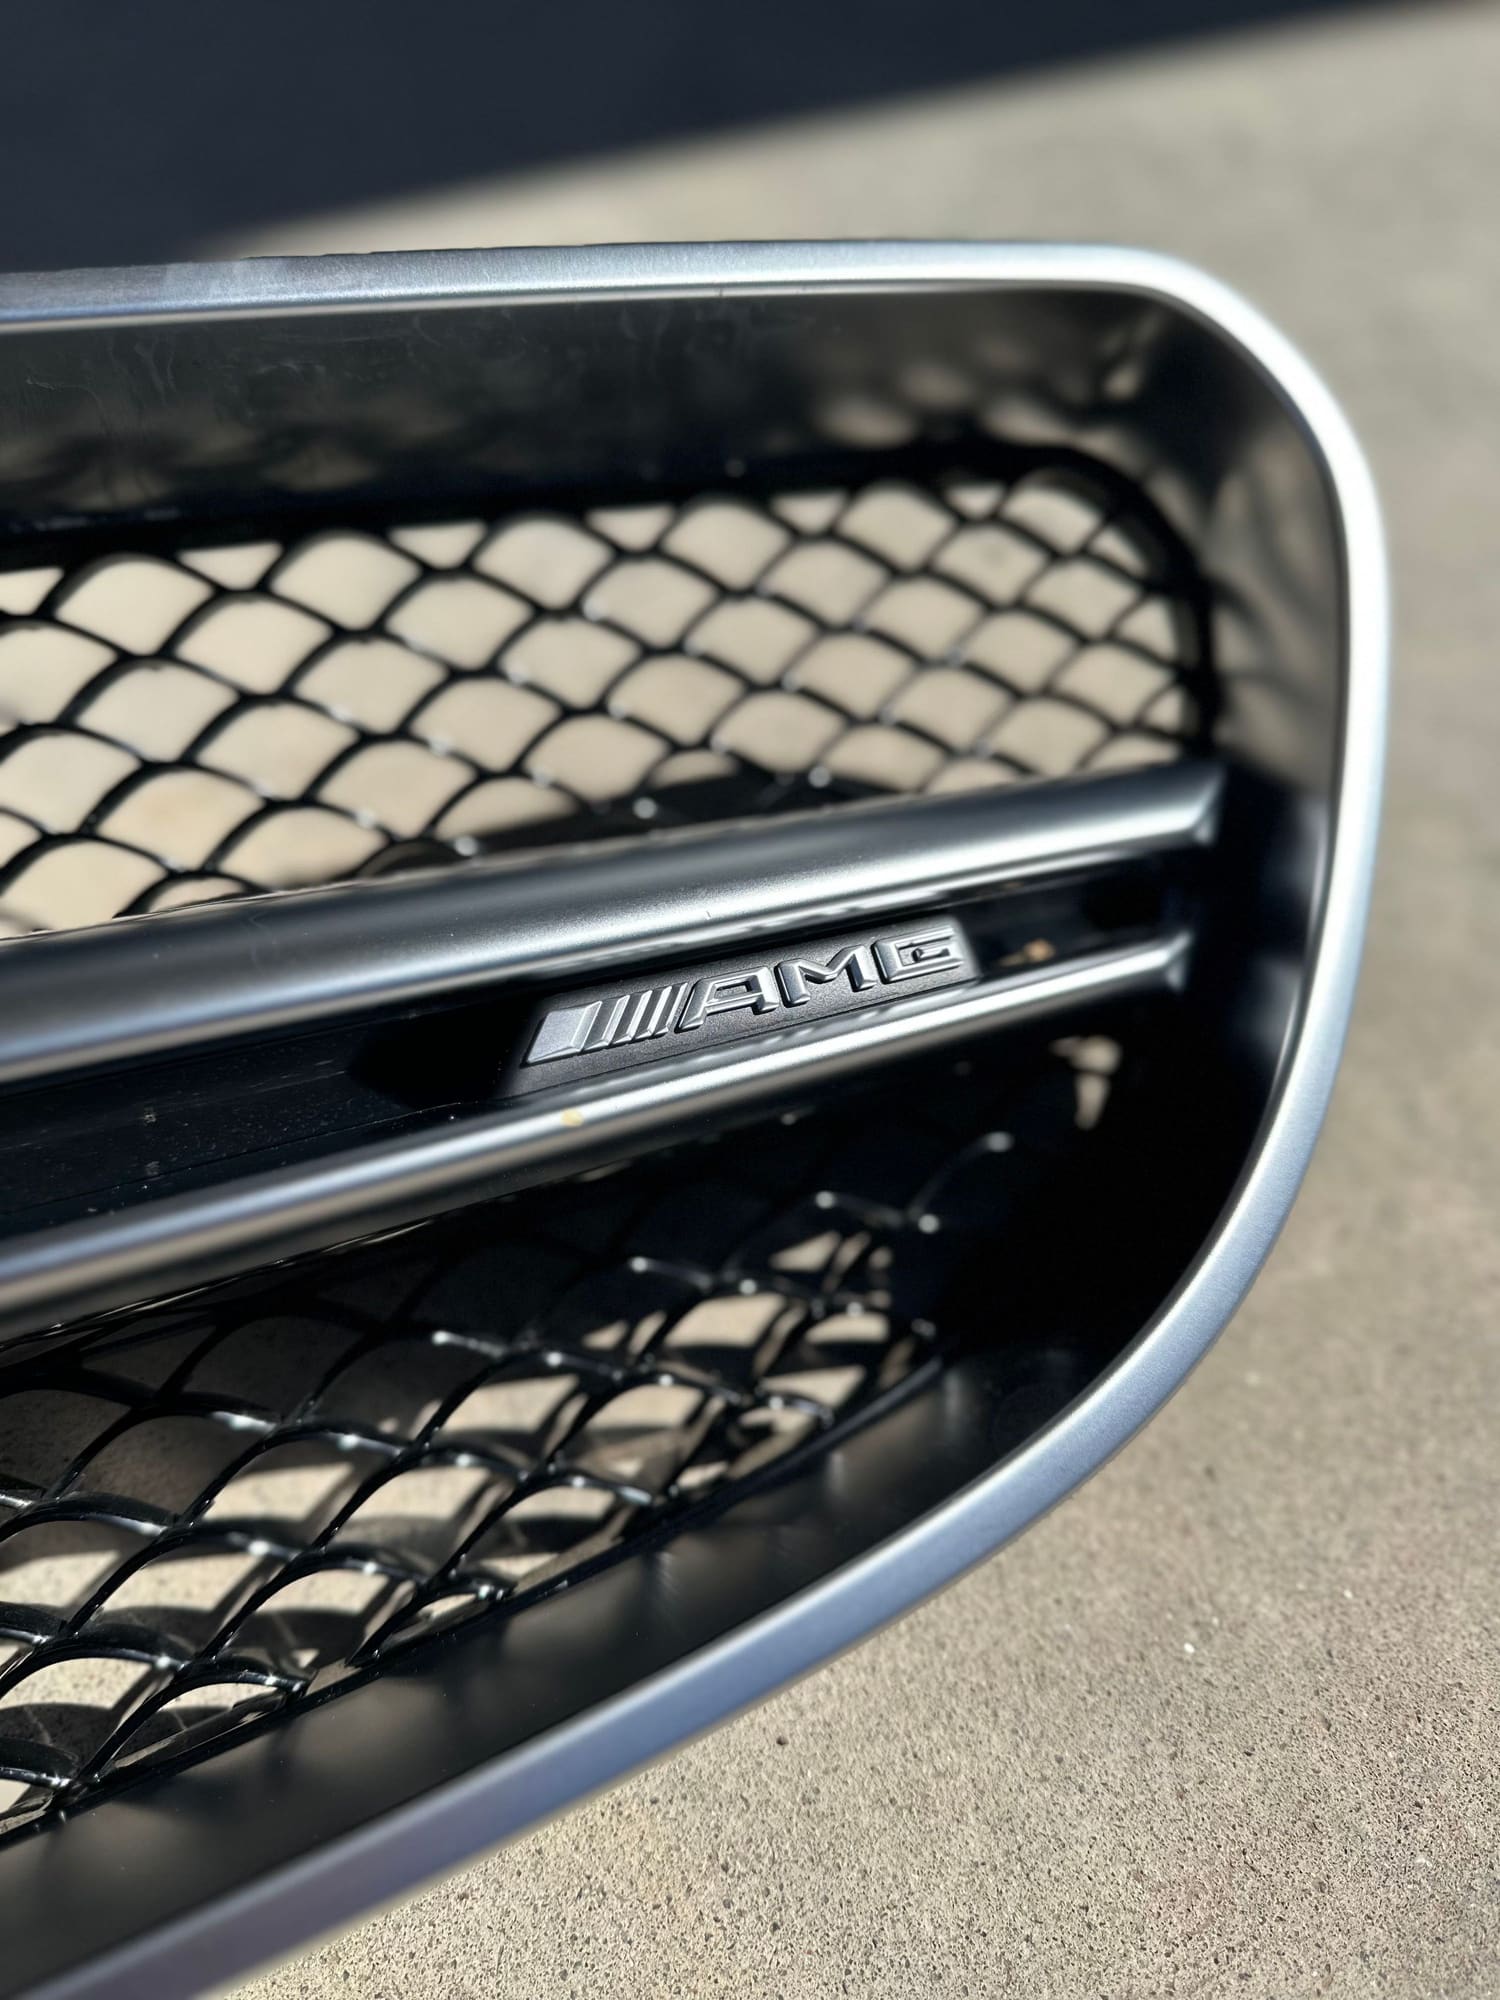 Exterior Body Parts - OEM Mercedes S-Class Coupe (2015-2017) C217 AMG Front Grille Like New - Used - 2015 to 2017 Mercedes-Benz S63 AMG - Denver, CO 80229, United States